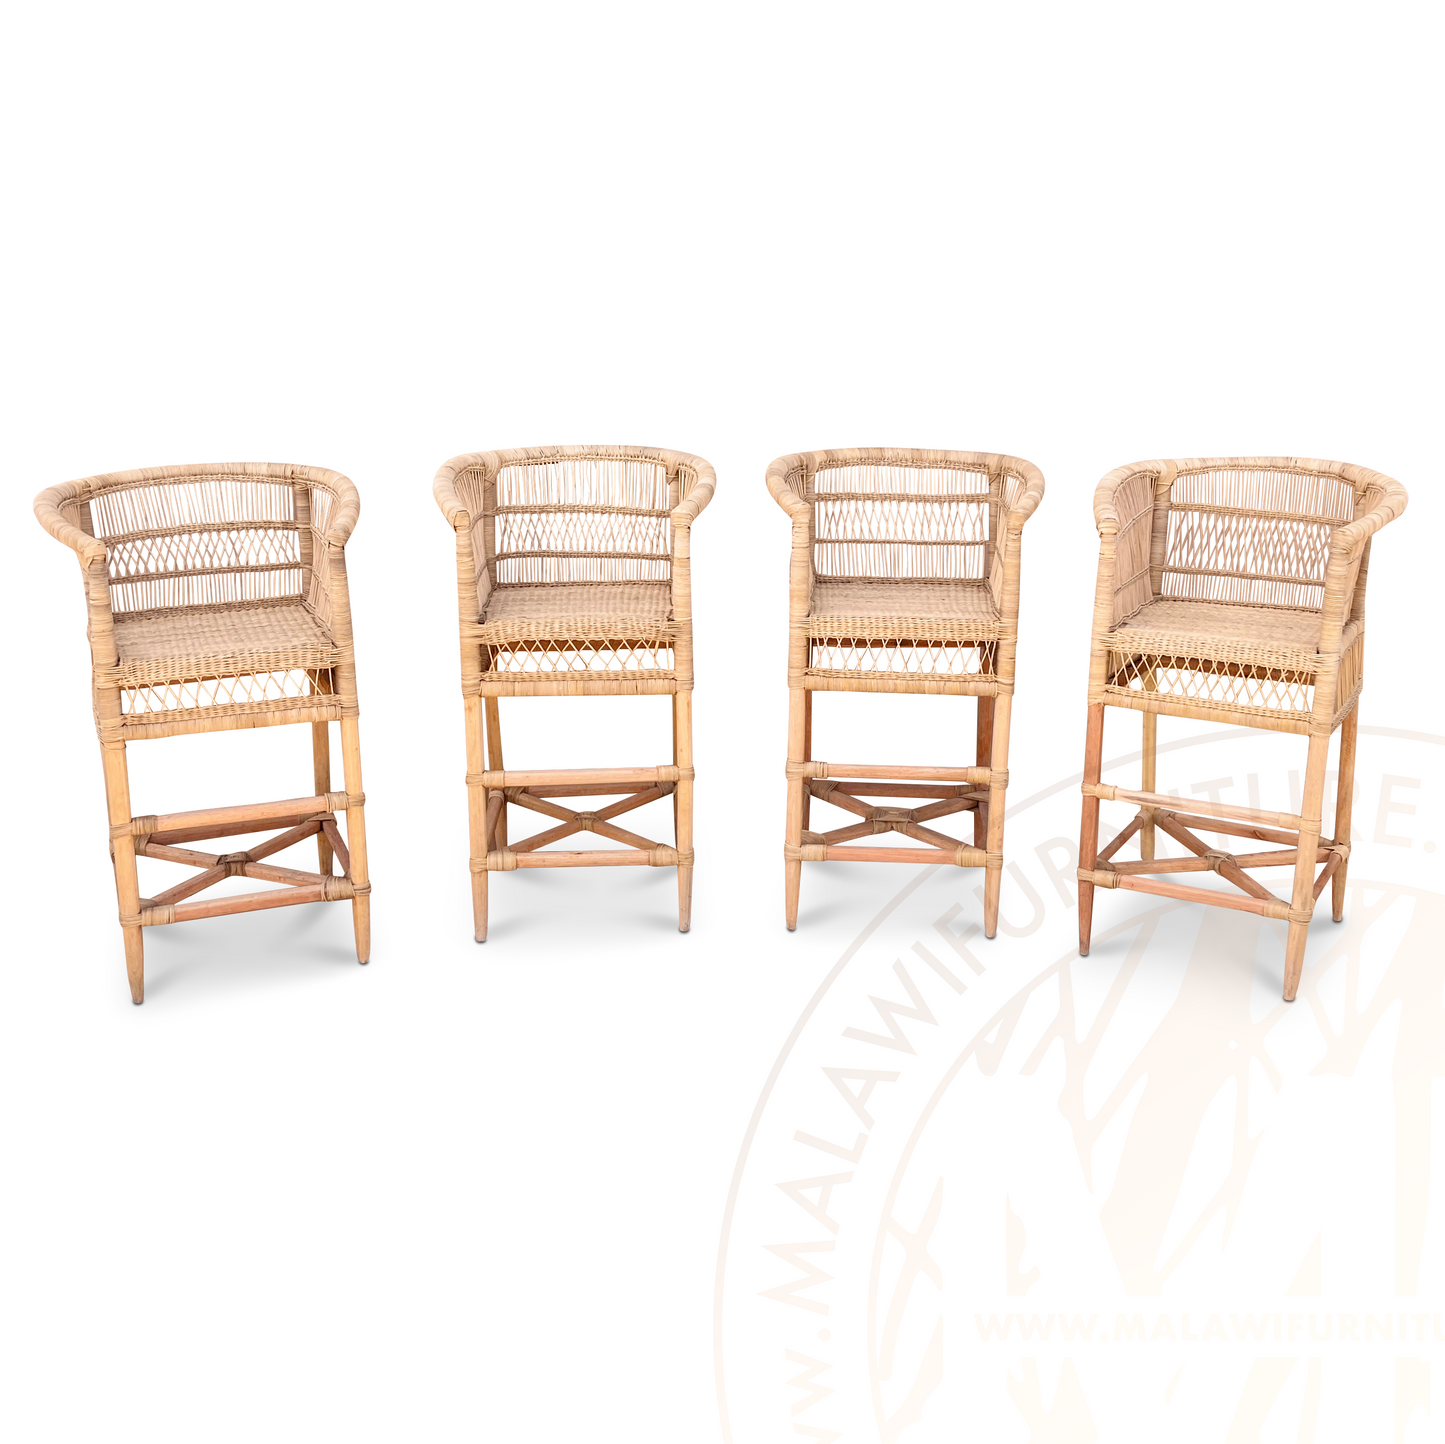 four Traditional Bar Stool Chairs